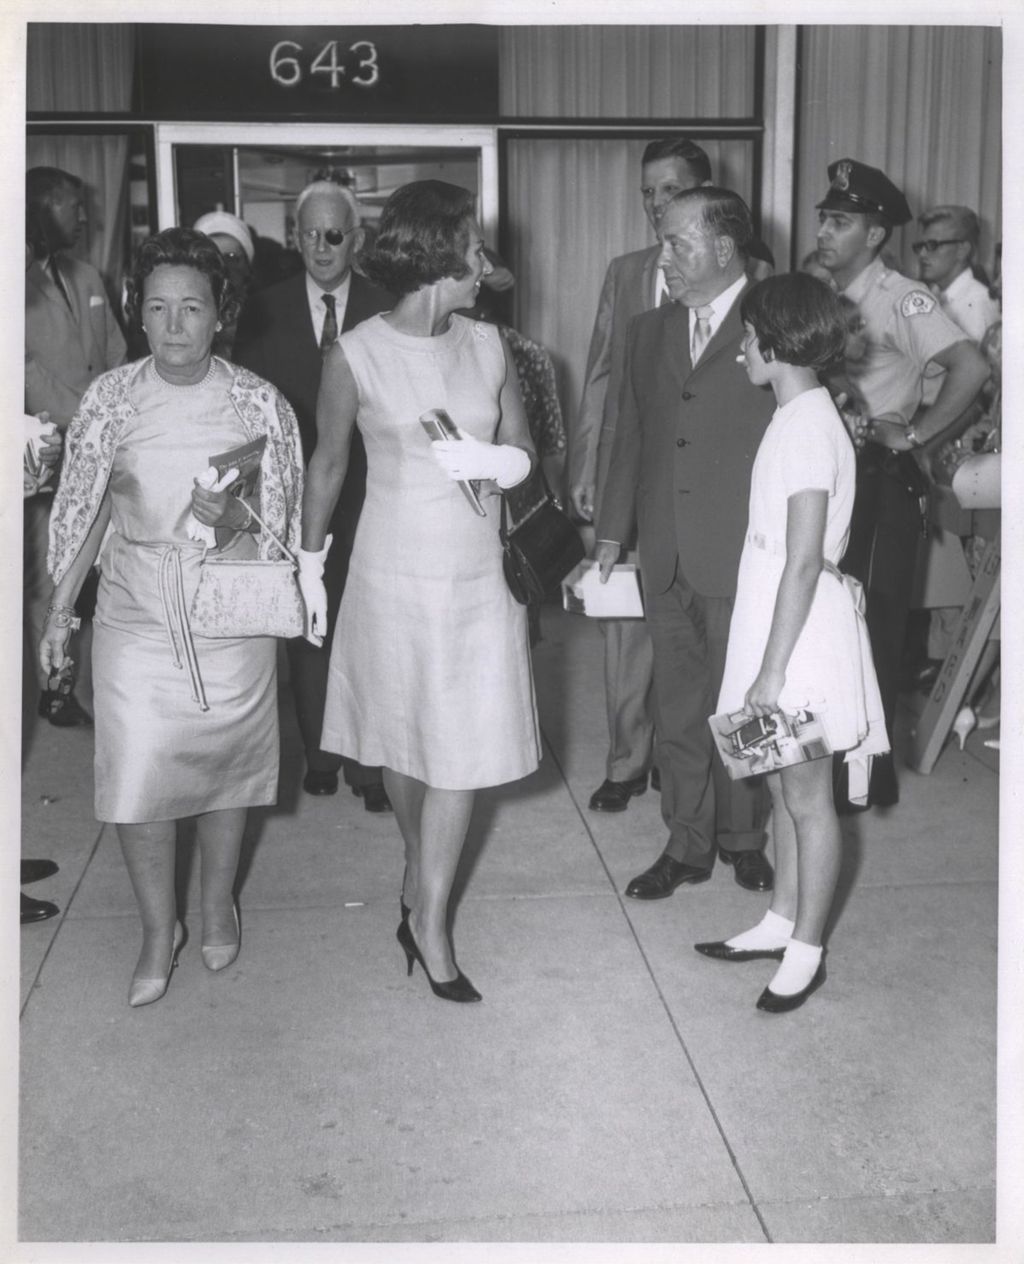 Eleanor Daley and Ethel Kennedy exiting the John F. Kennedy memorial exhibition